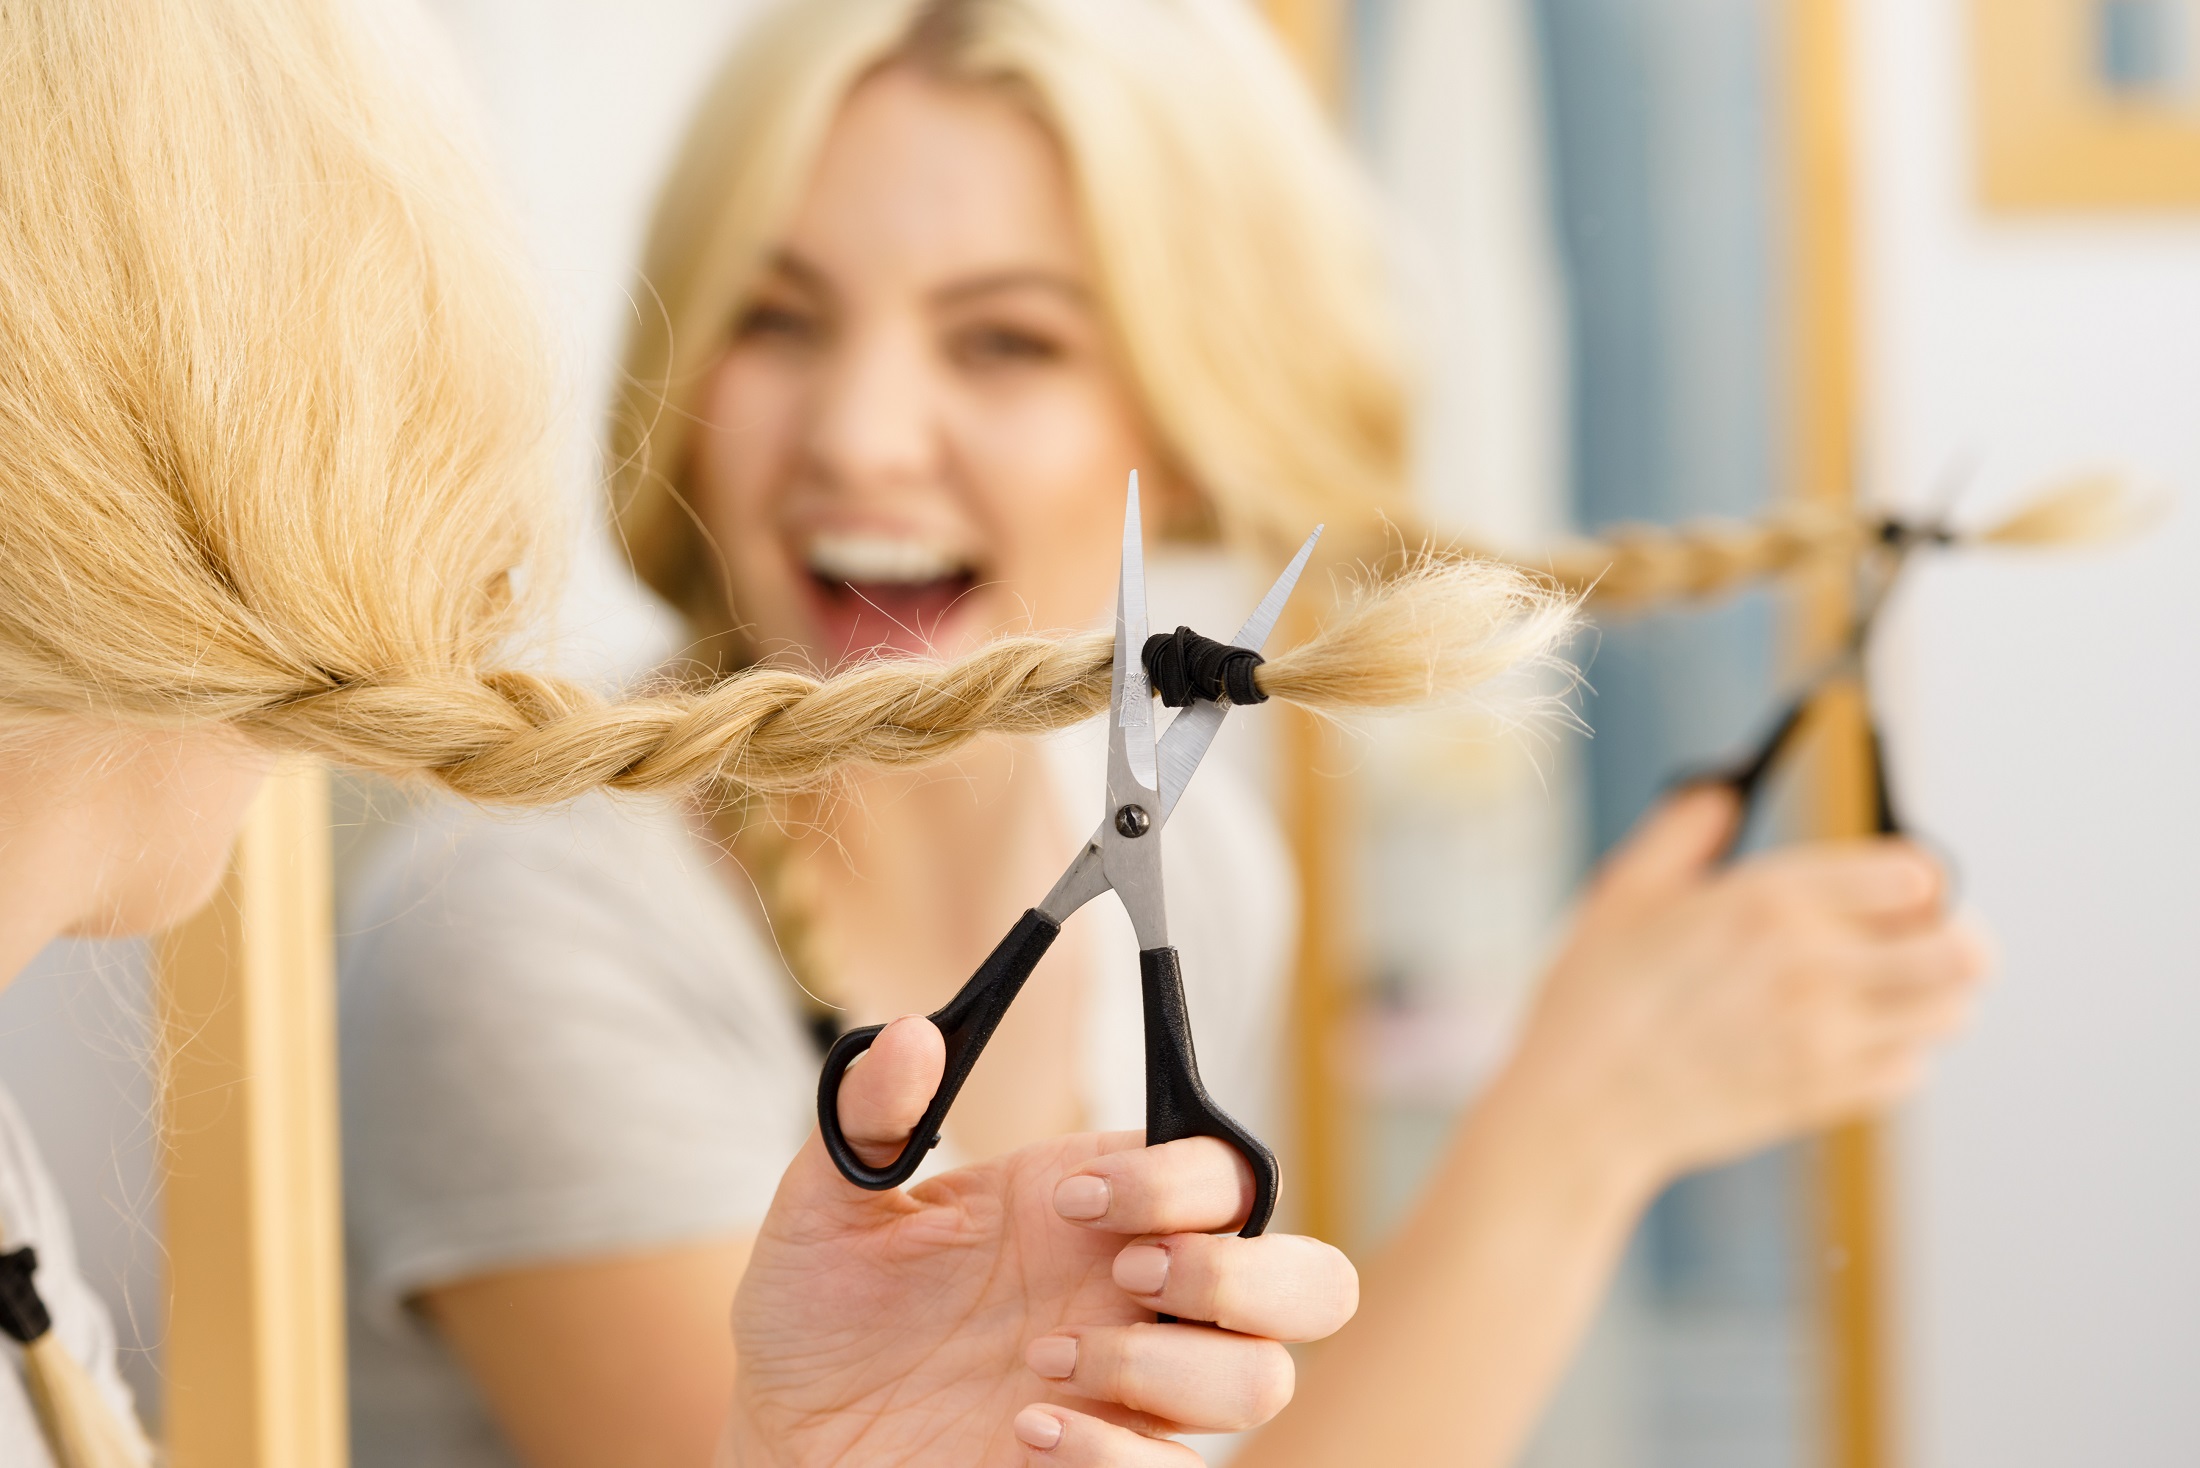 No time for a haircut? Here are a few tips to help you cut your hair or bangs yourself without regretting it